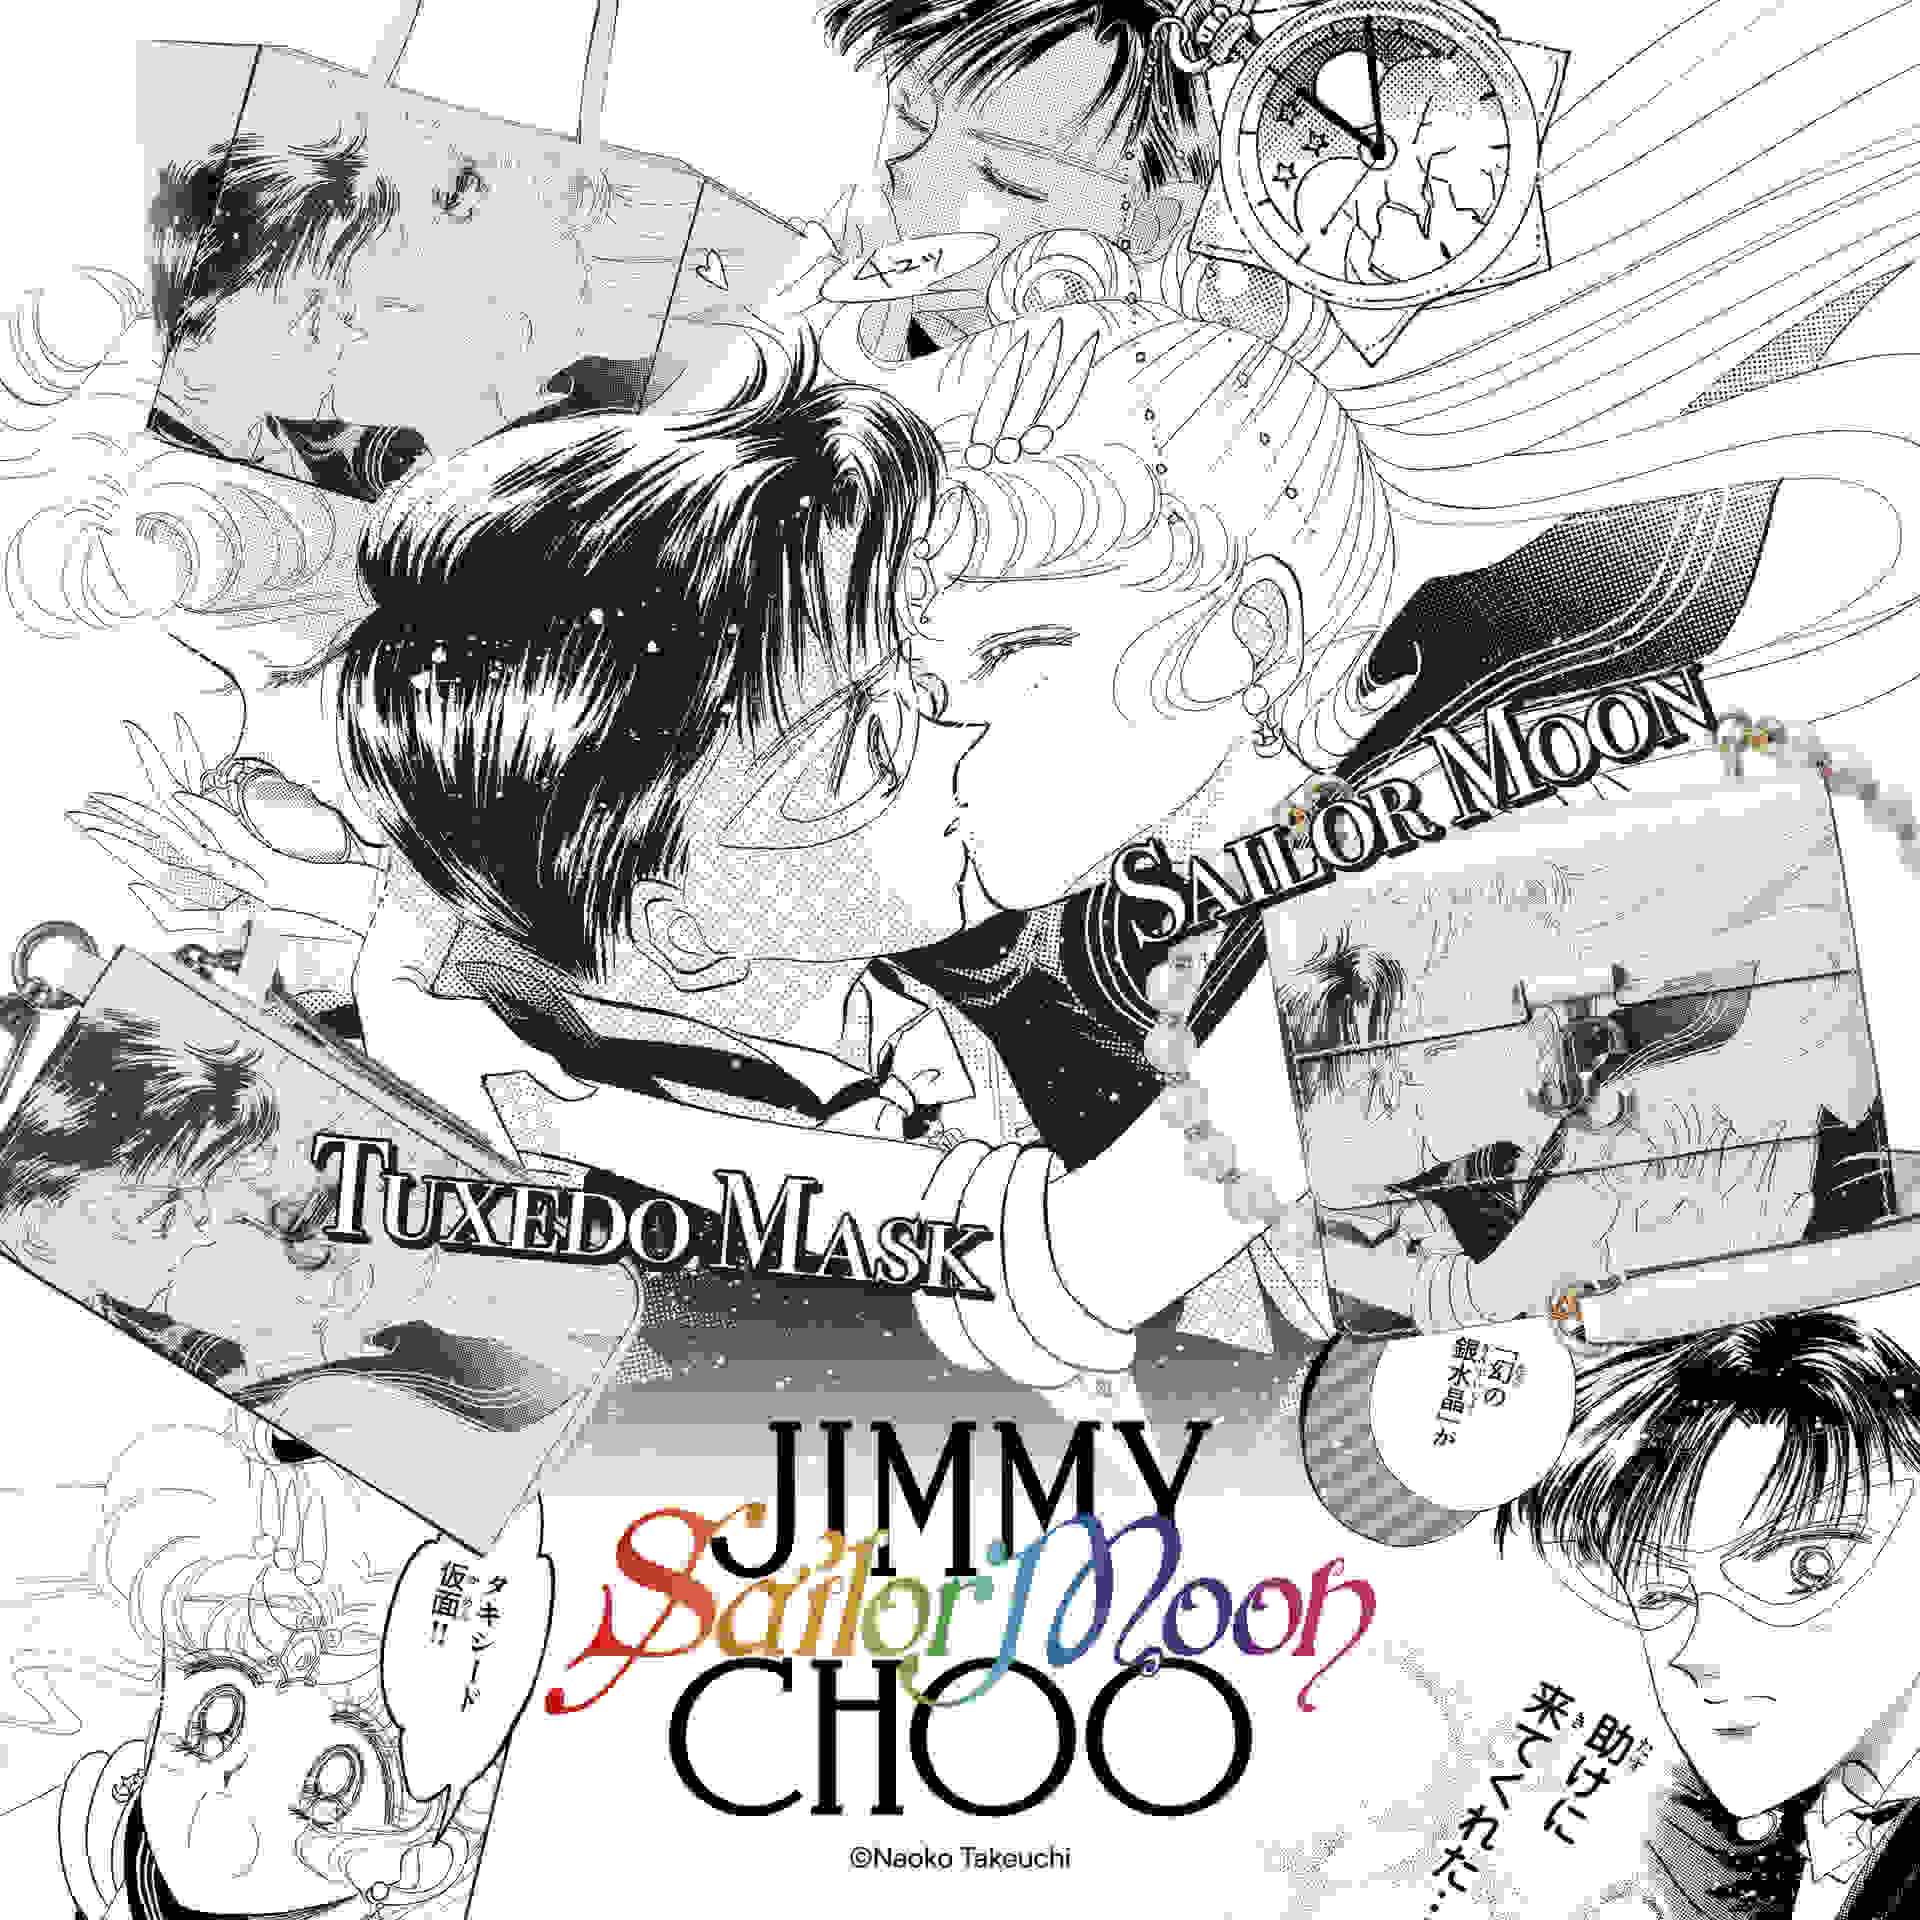 Jimmy Choo x Pretty Guadian Sailor Moon: An Exclusive Collaboration